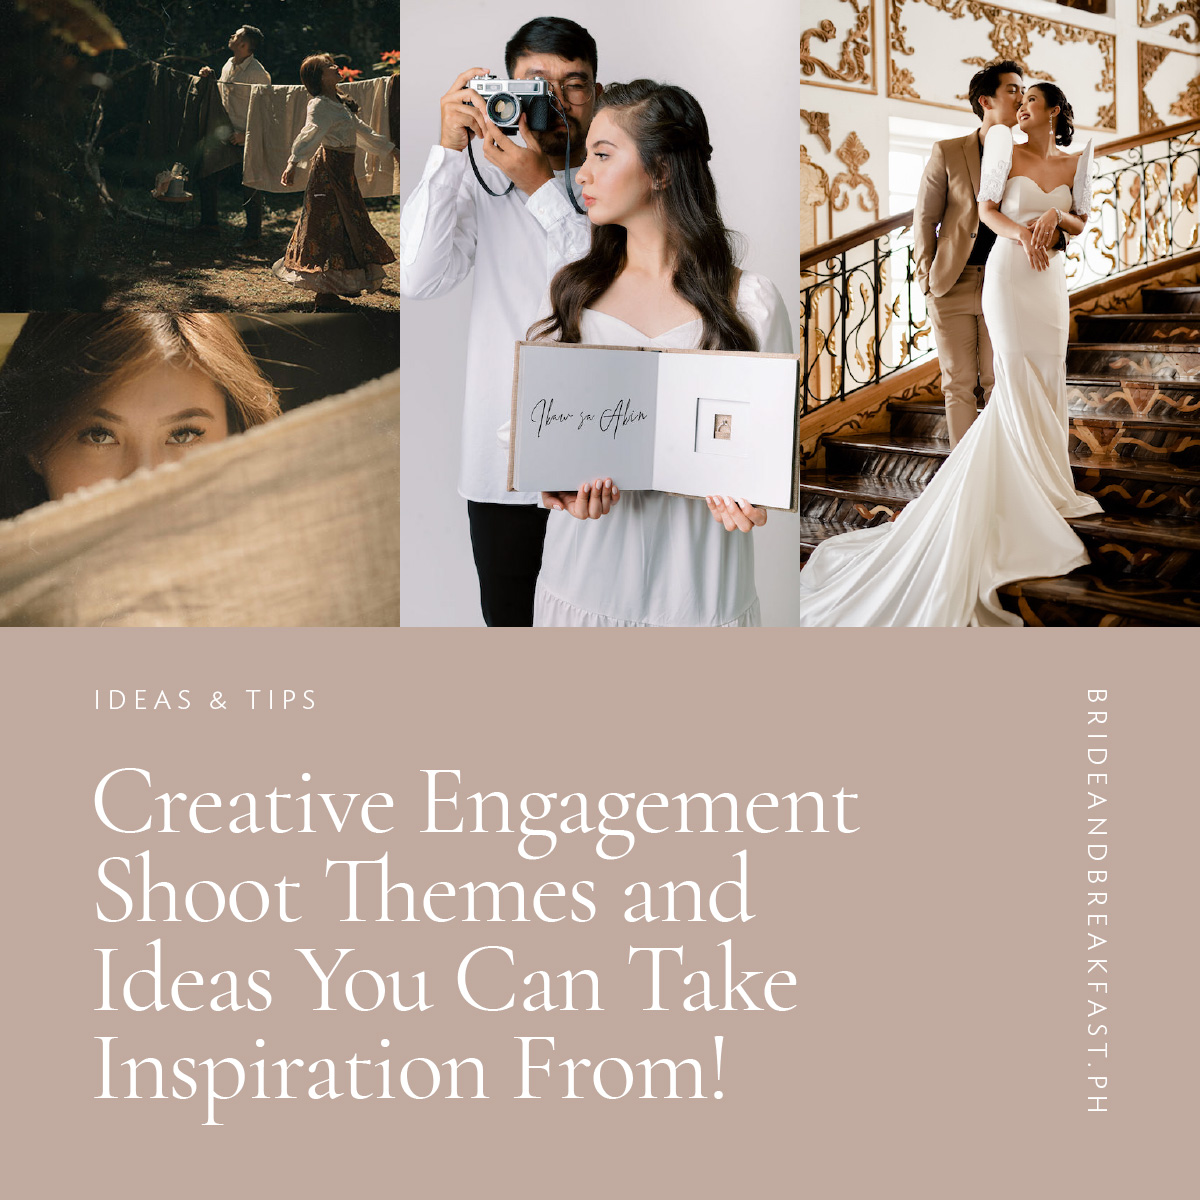 9 Creative Engagement Shoot Themes and Ideas You Can Take Inspiration From!